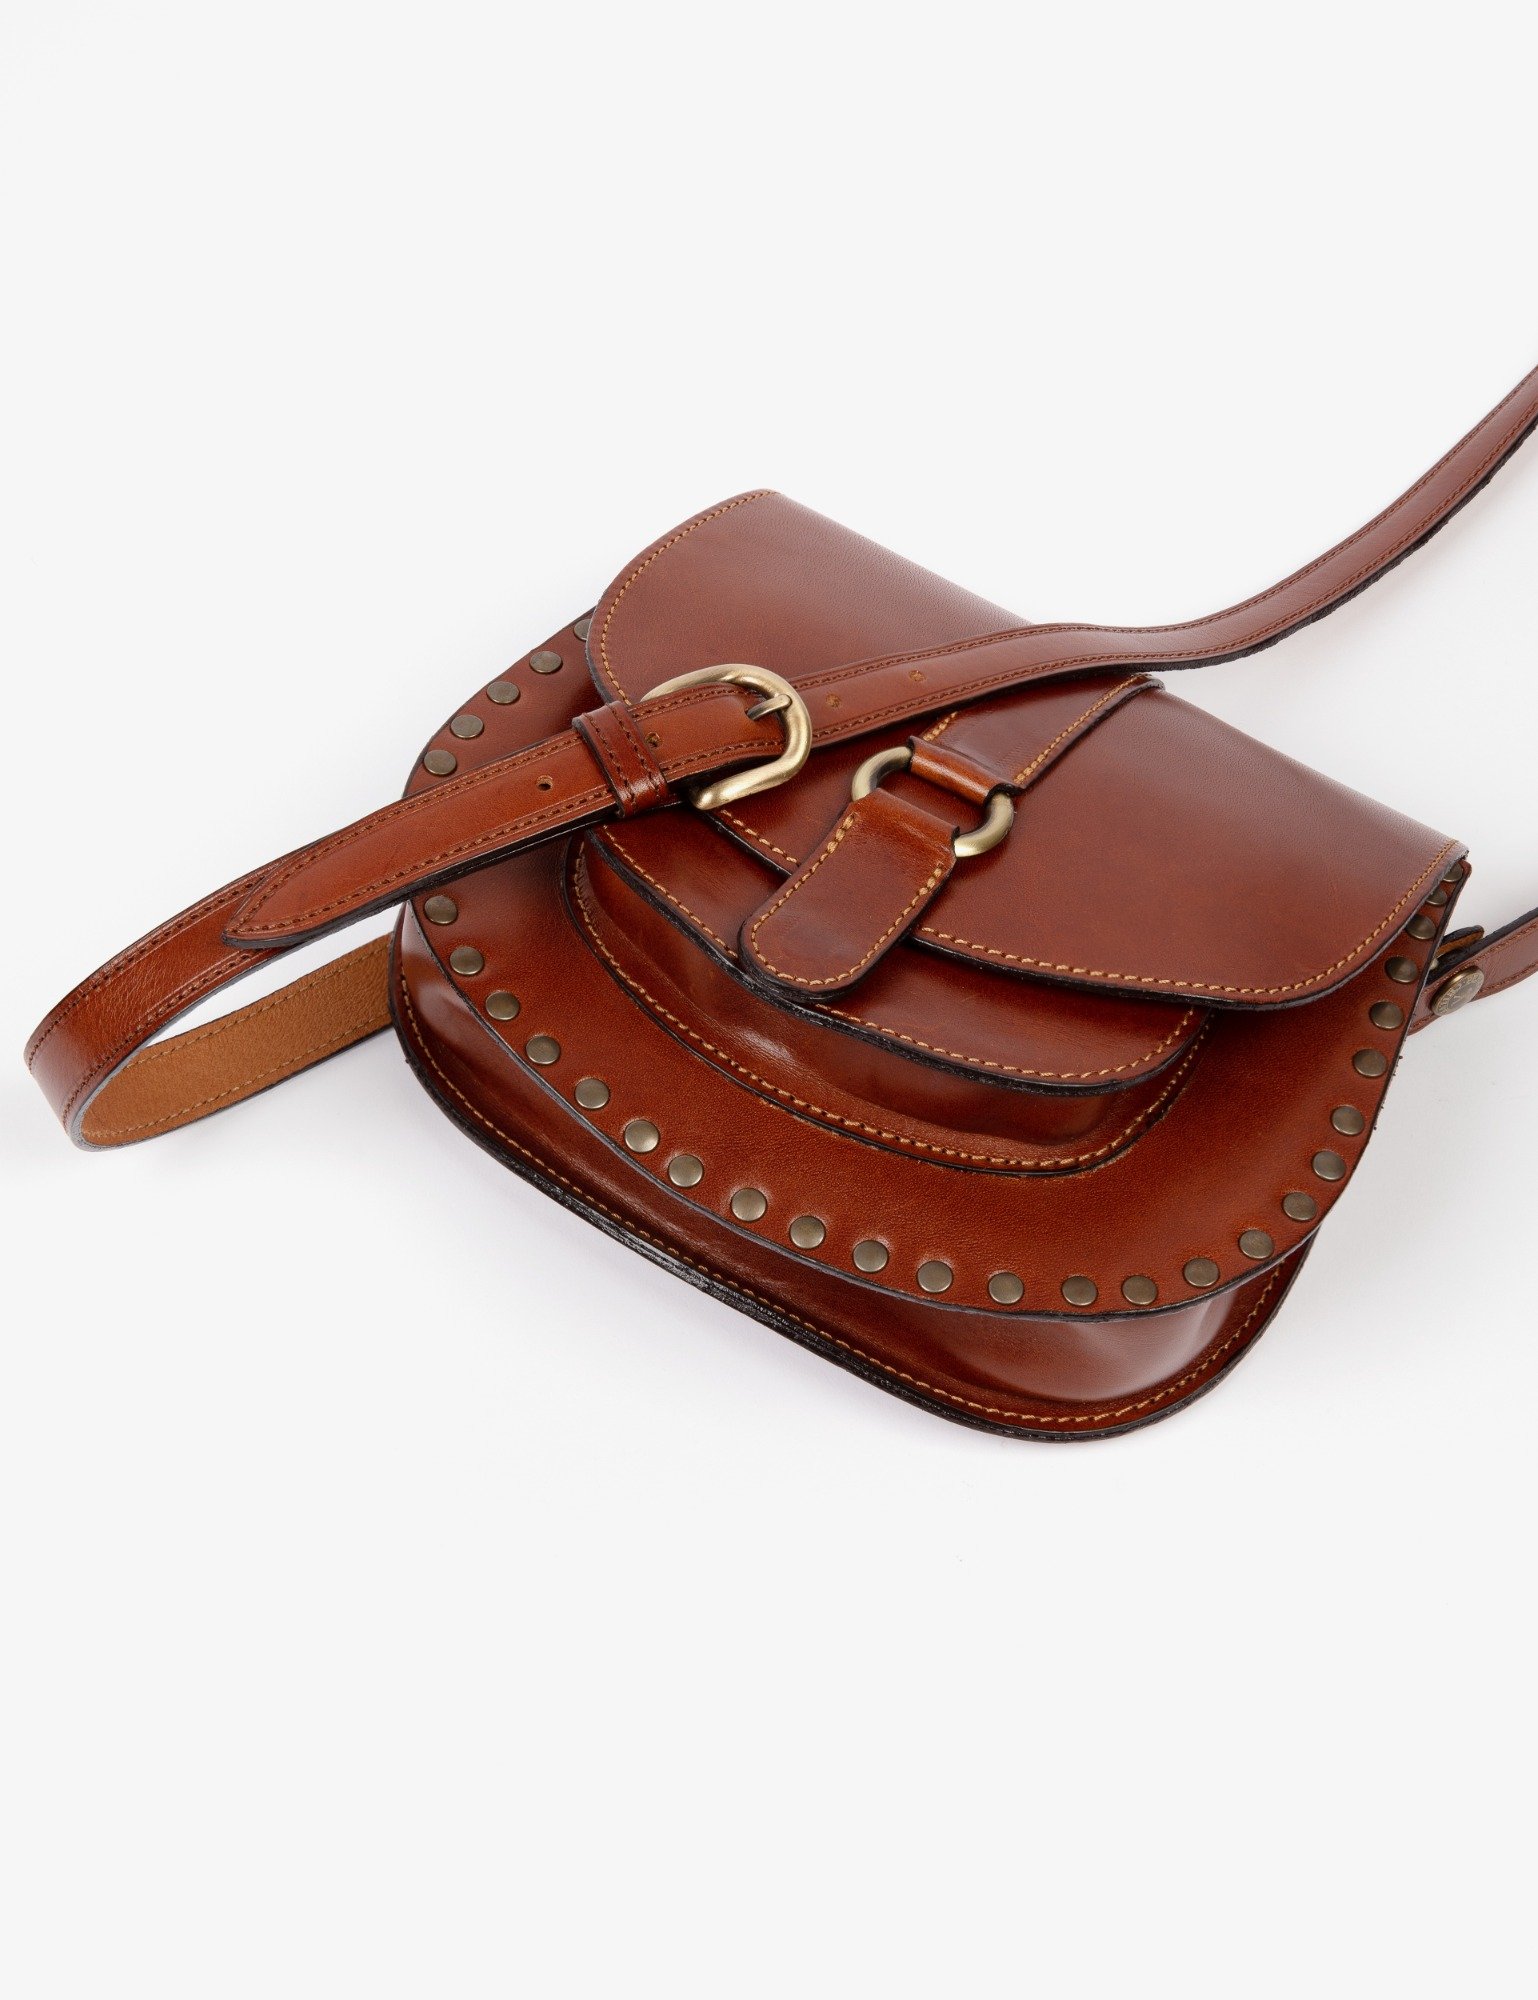 Bell Stud Leather Bag - Conker | Women's Bags & Purses | Penelope Chilvers